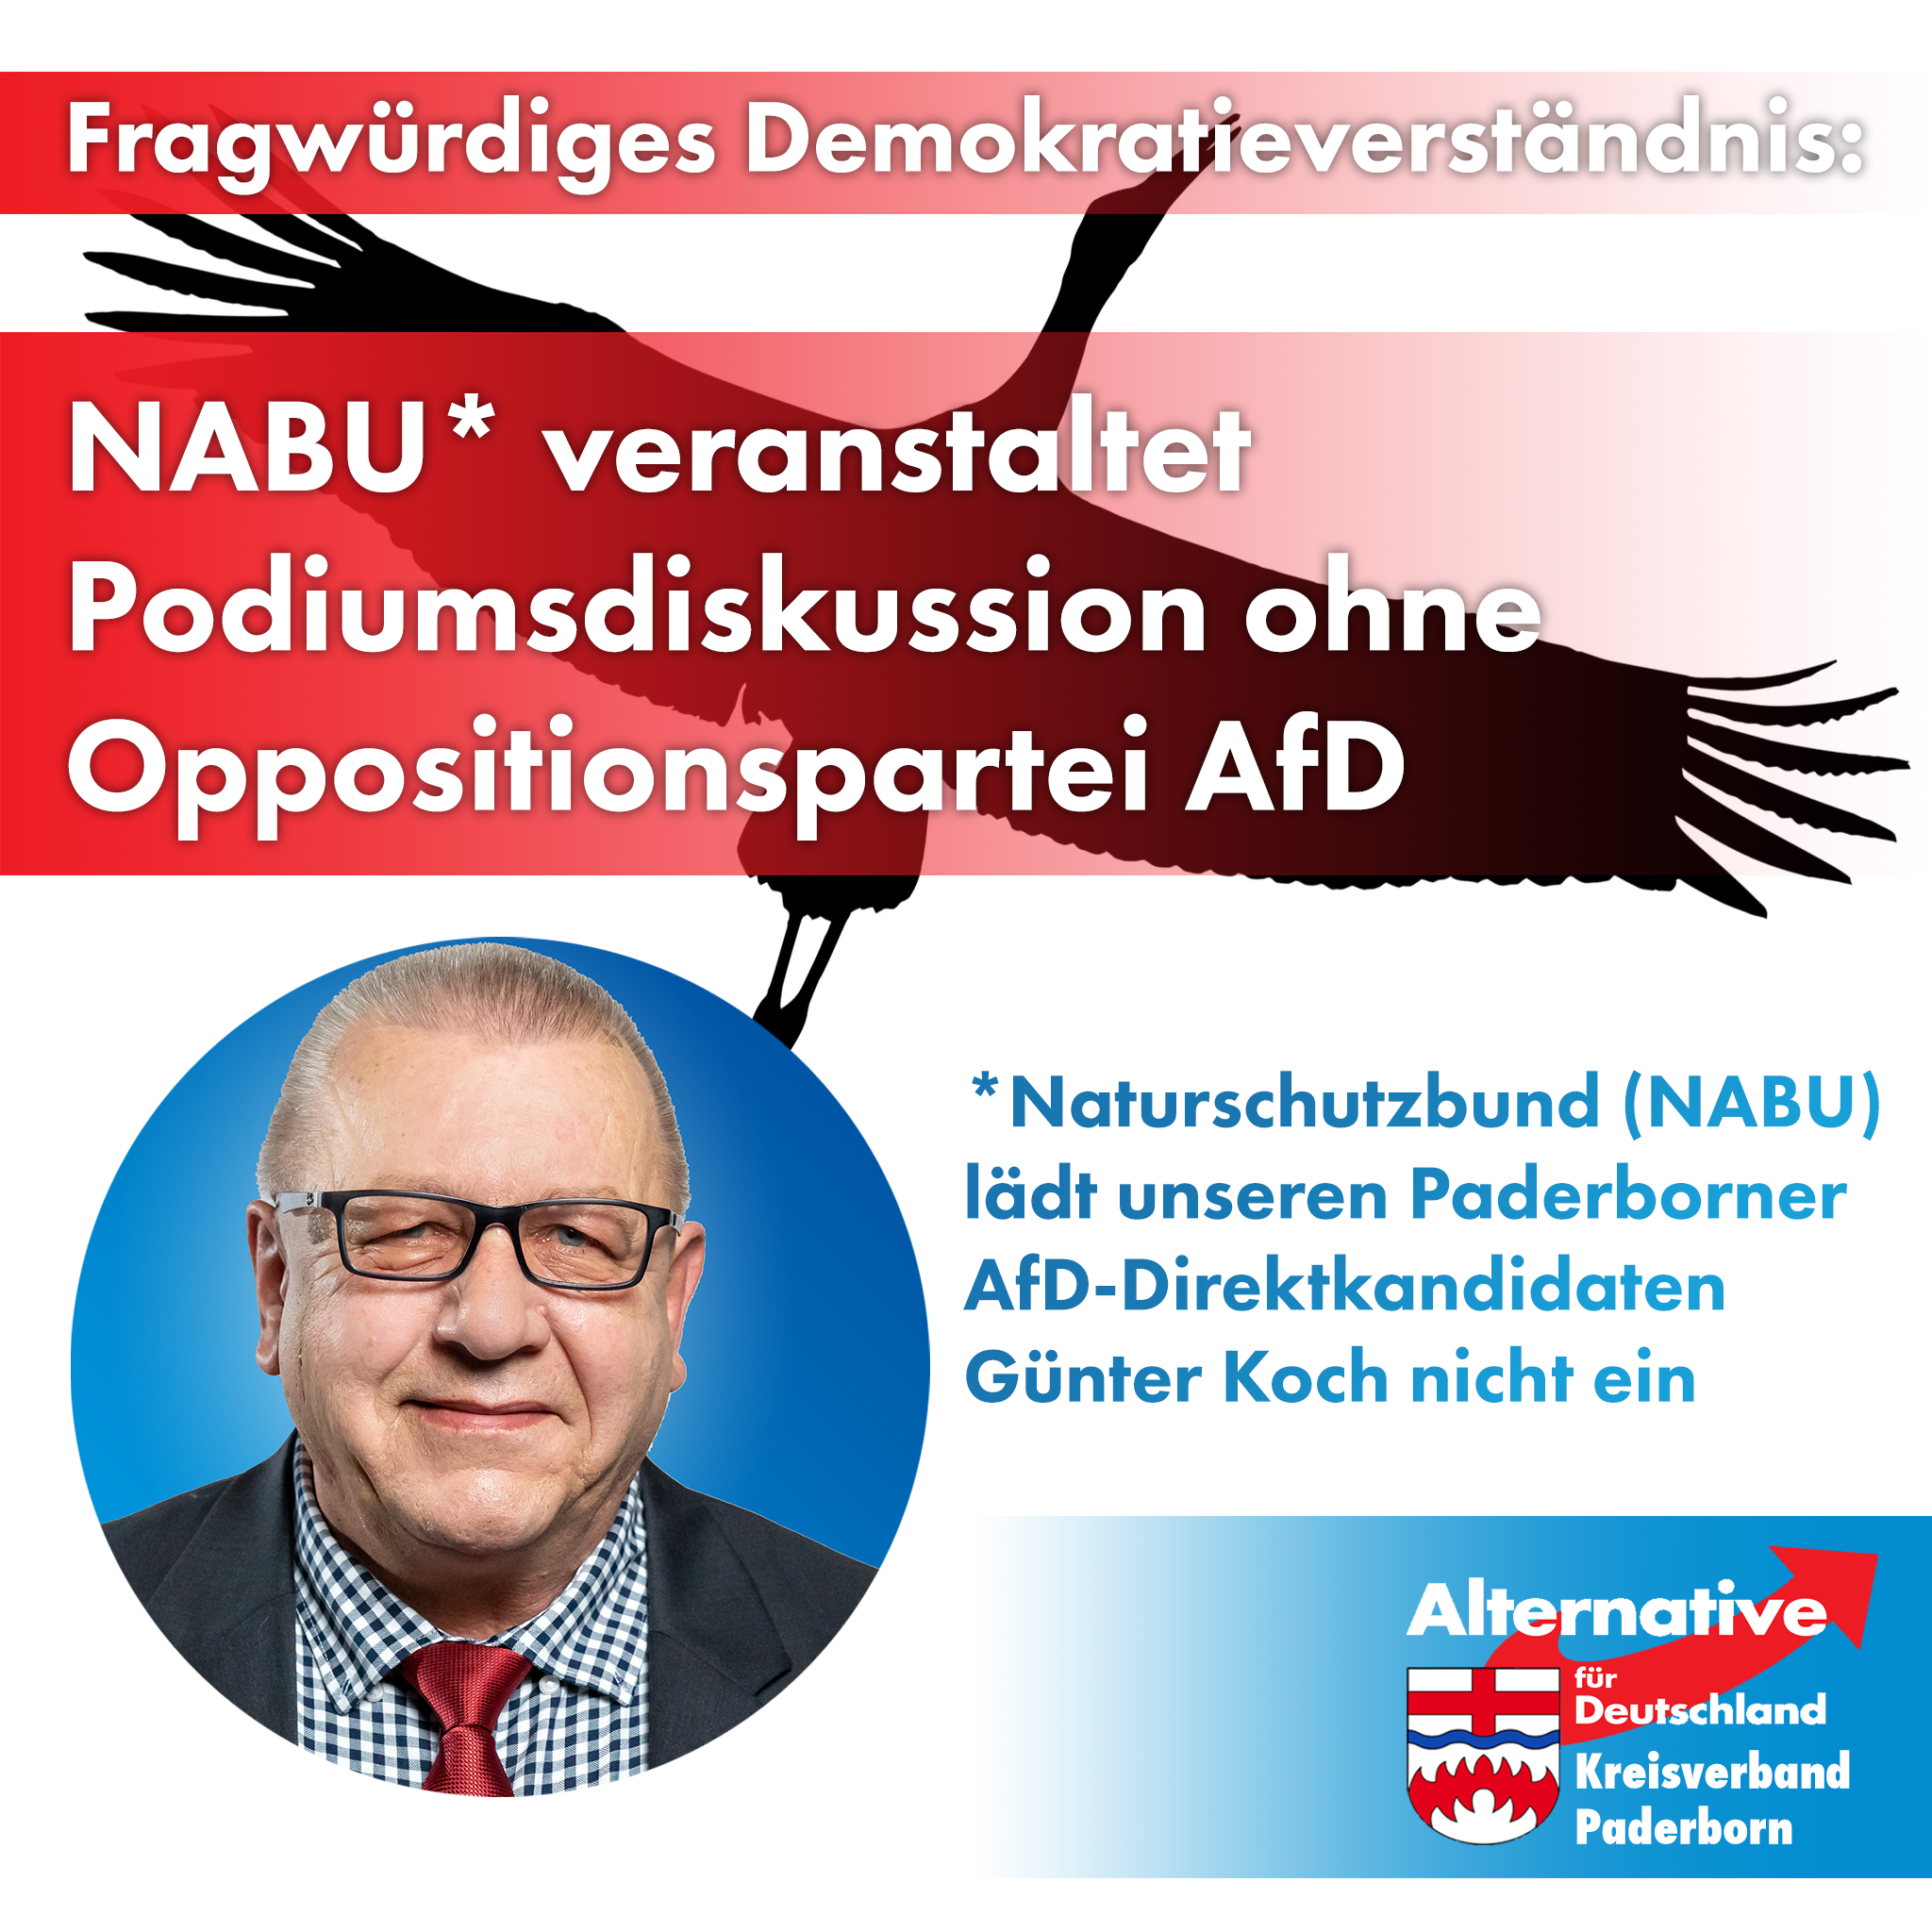 You are currently viewing Fragwürdiges Demokratieverständnis: NABU-Podiumsdiskussion ohne AfD